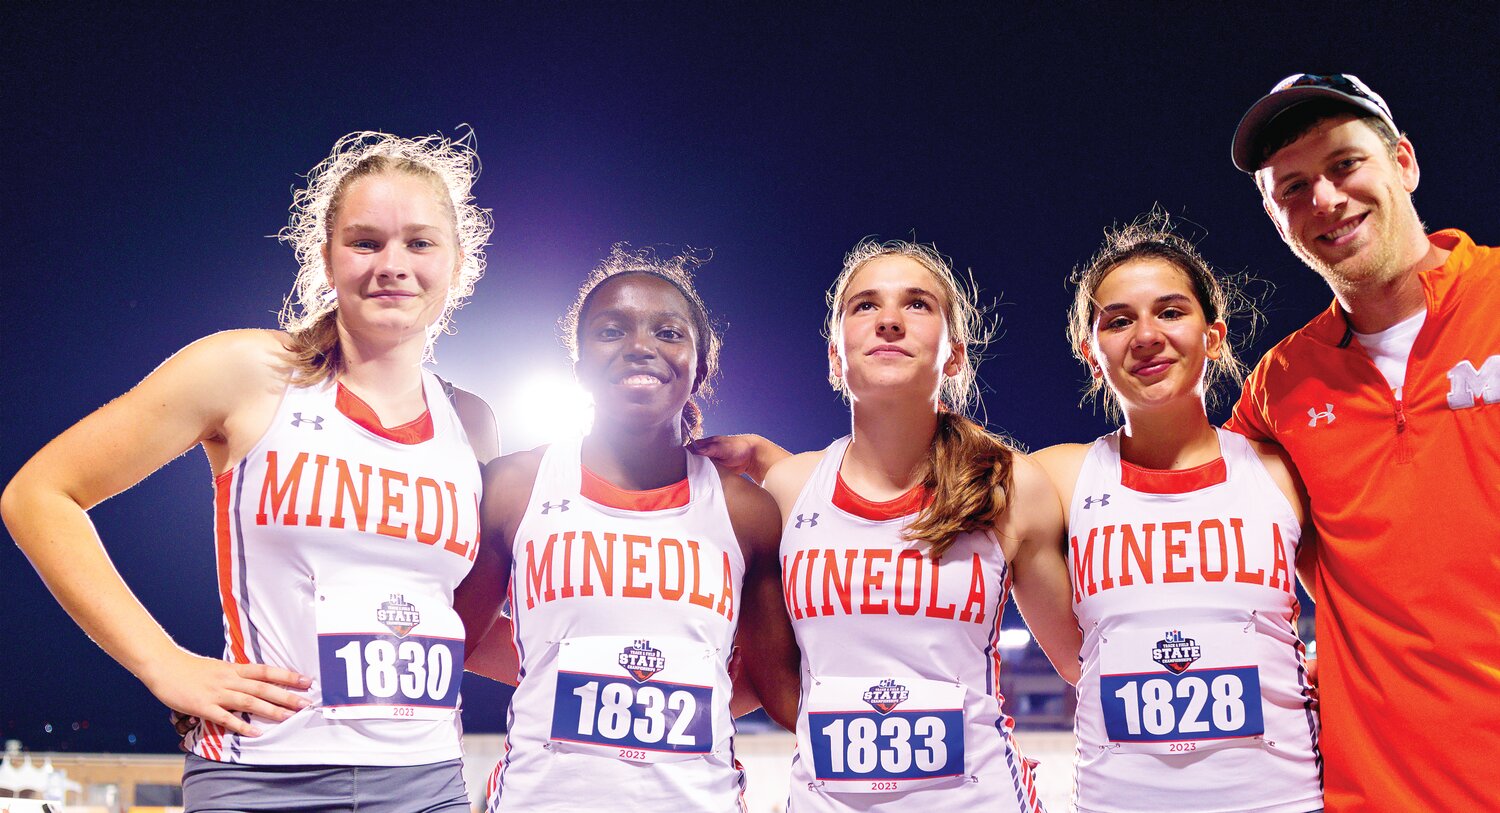 The Mineola Lady Jacket 1600-meter relay team, from left, Tanner Hartzog, Shylah Kratzmeyer, Raylie Peebles and Carmen Carrasco, with Coach Daven Murphree, after their race in Austin Thursday. They set a goal to return to the state meet after qualifying last year. [view more relay running]